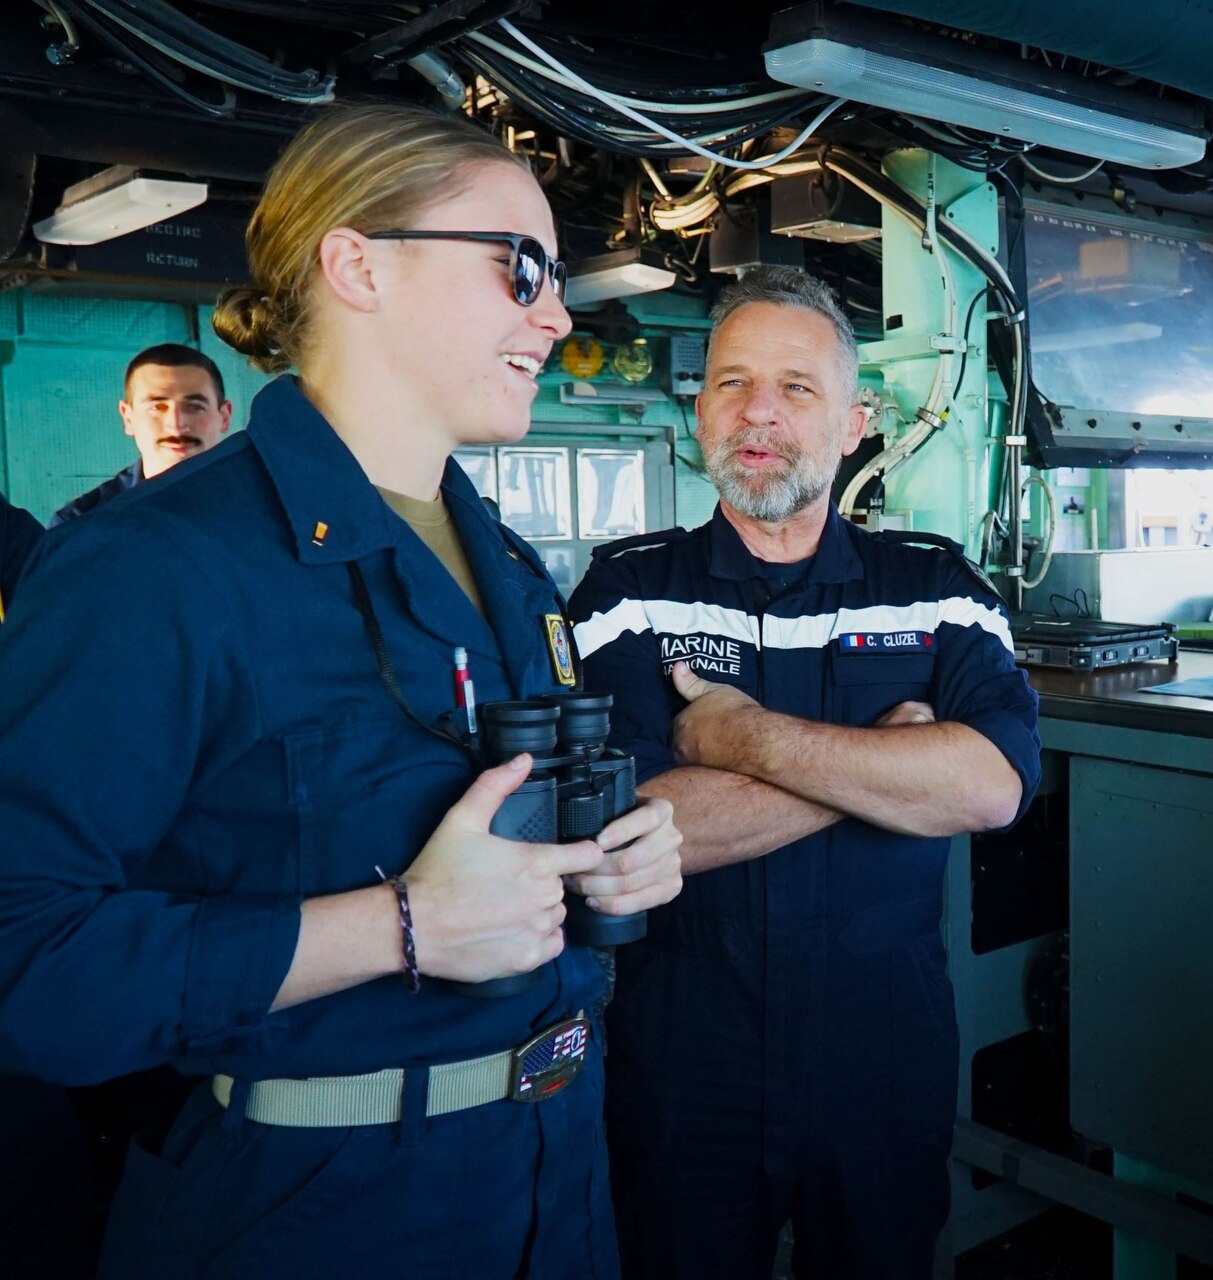 MEDITERRANEAN SEA (Dec. 5, 2022) Ensign Bray Zimmerman, Operations Intelligence Division Officer aboard the Arleigh Burke-class guided-missile destroyer USS Arleigh Burke (DDG 51), left, shows Rear Admiral Christophe Cluzel, commander of the French Maritime Force and the French carrier strike group, the Pilot House during a ship’s tour, Dec. 5, 2022. Arleigh Burke is on a scheduled deployment in the U.S. Naval Forces Europe area of operations, employed by U.S. Sixth Fleet to defend U.S., allied and partner interests. (U.S. Navy photo by Ensign Benjamin Cusimano)